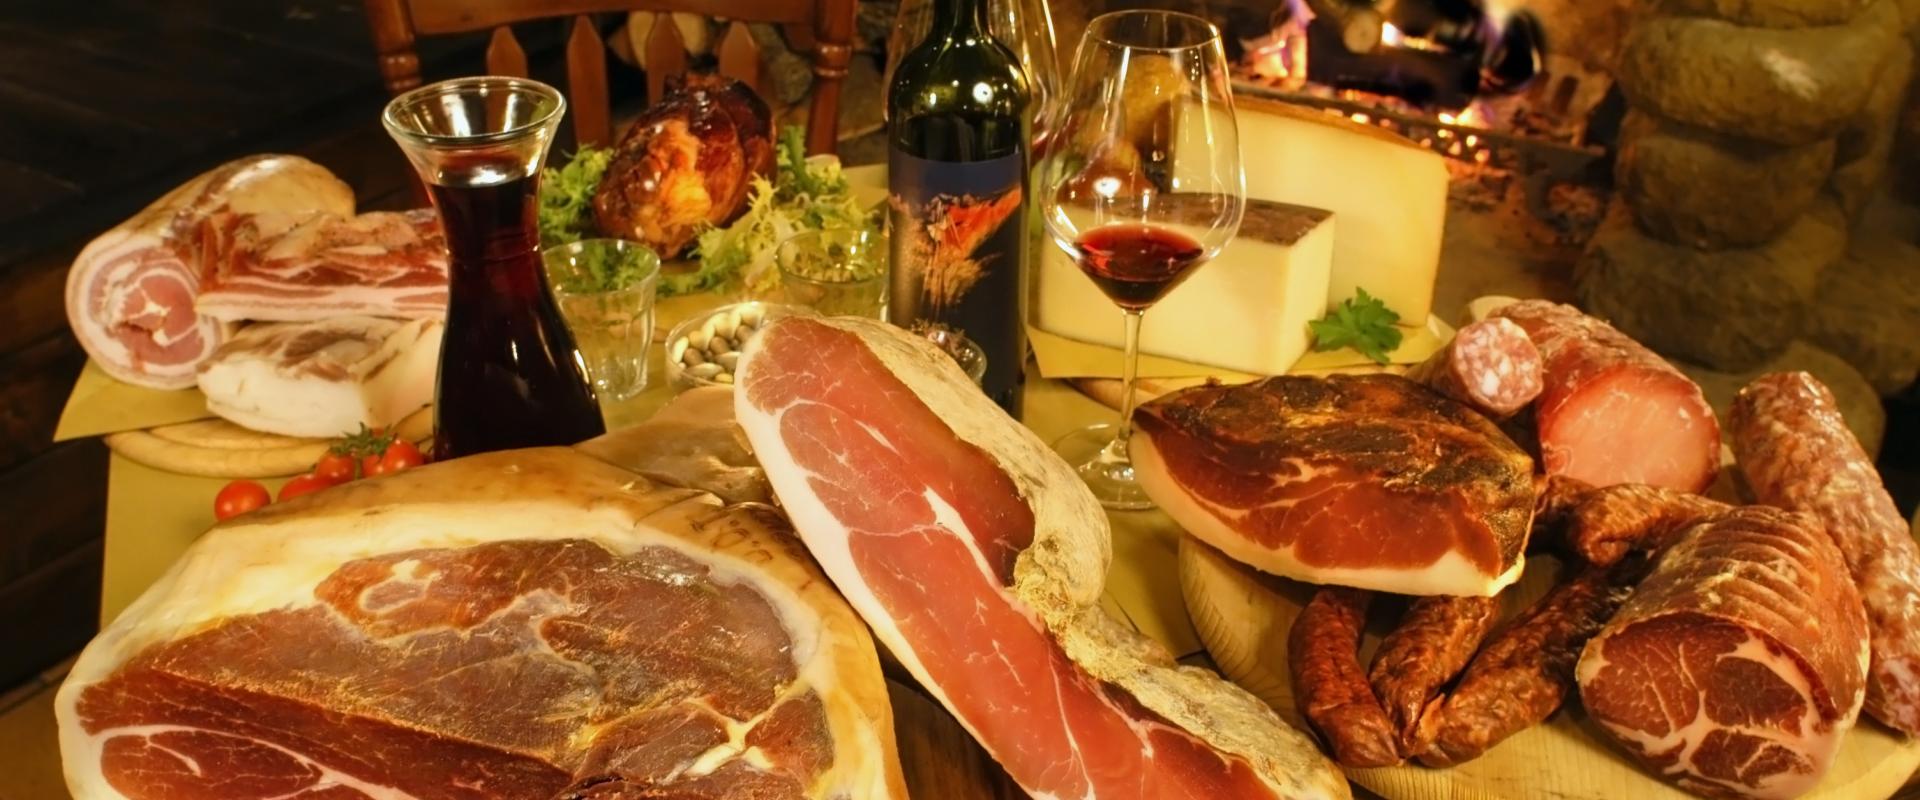 Tasting of tupical products in Asolo